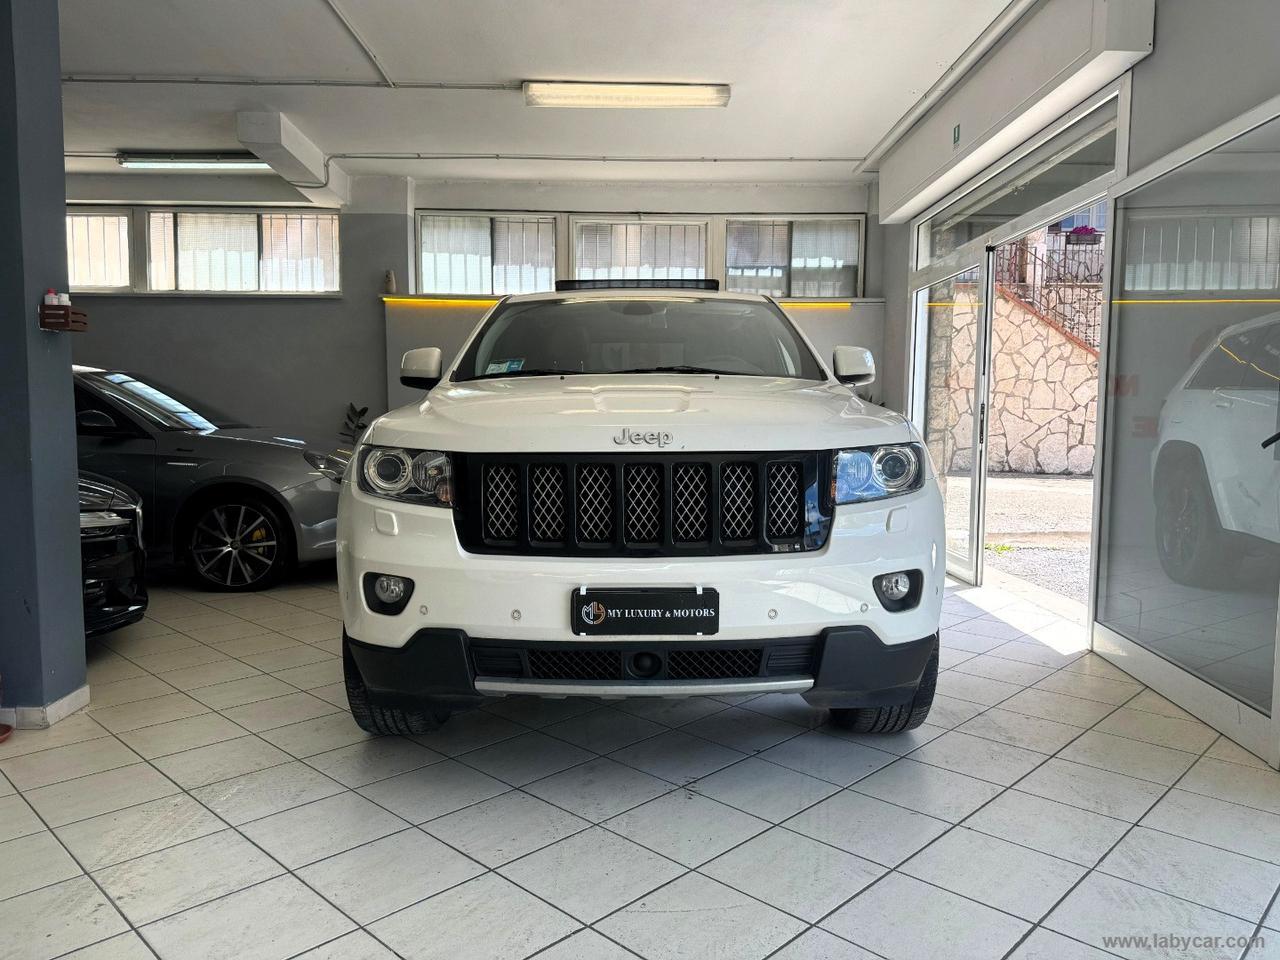 JEEP Gr. Cherokee 3.0 CRD 241 CV S Limited UNIPRO*P.CONS